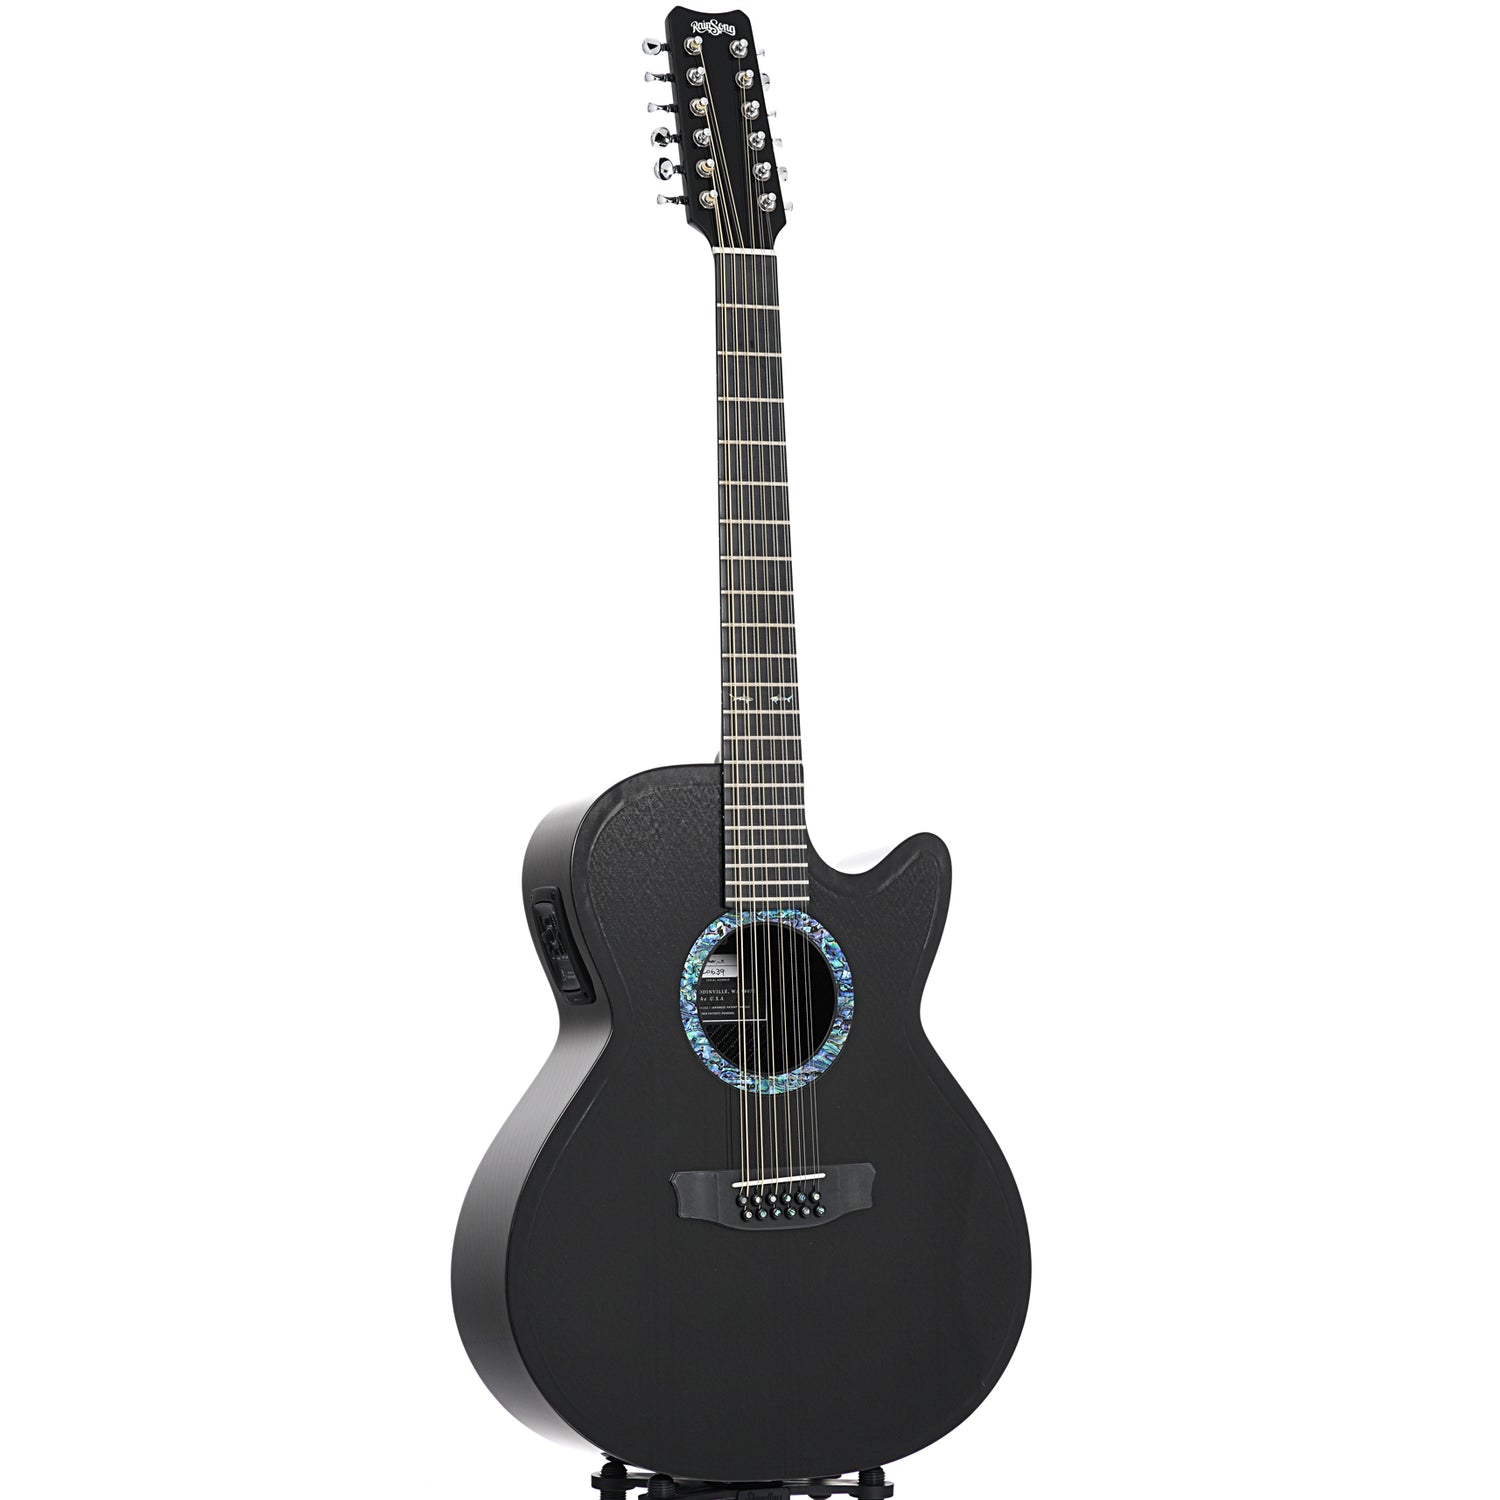 Image 11 of Rainsong WS3000 12-String Guitar & Case, Baggs Element Pickup- SKU# CO-WS3000 : Product Type 12-String Guitars : Elderly Instruments